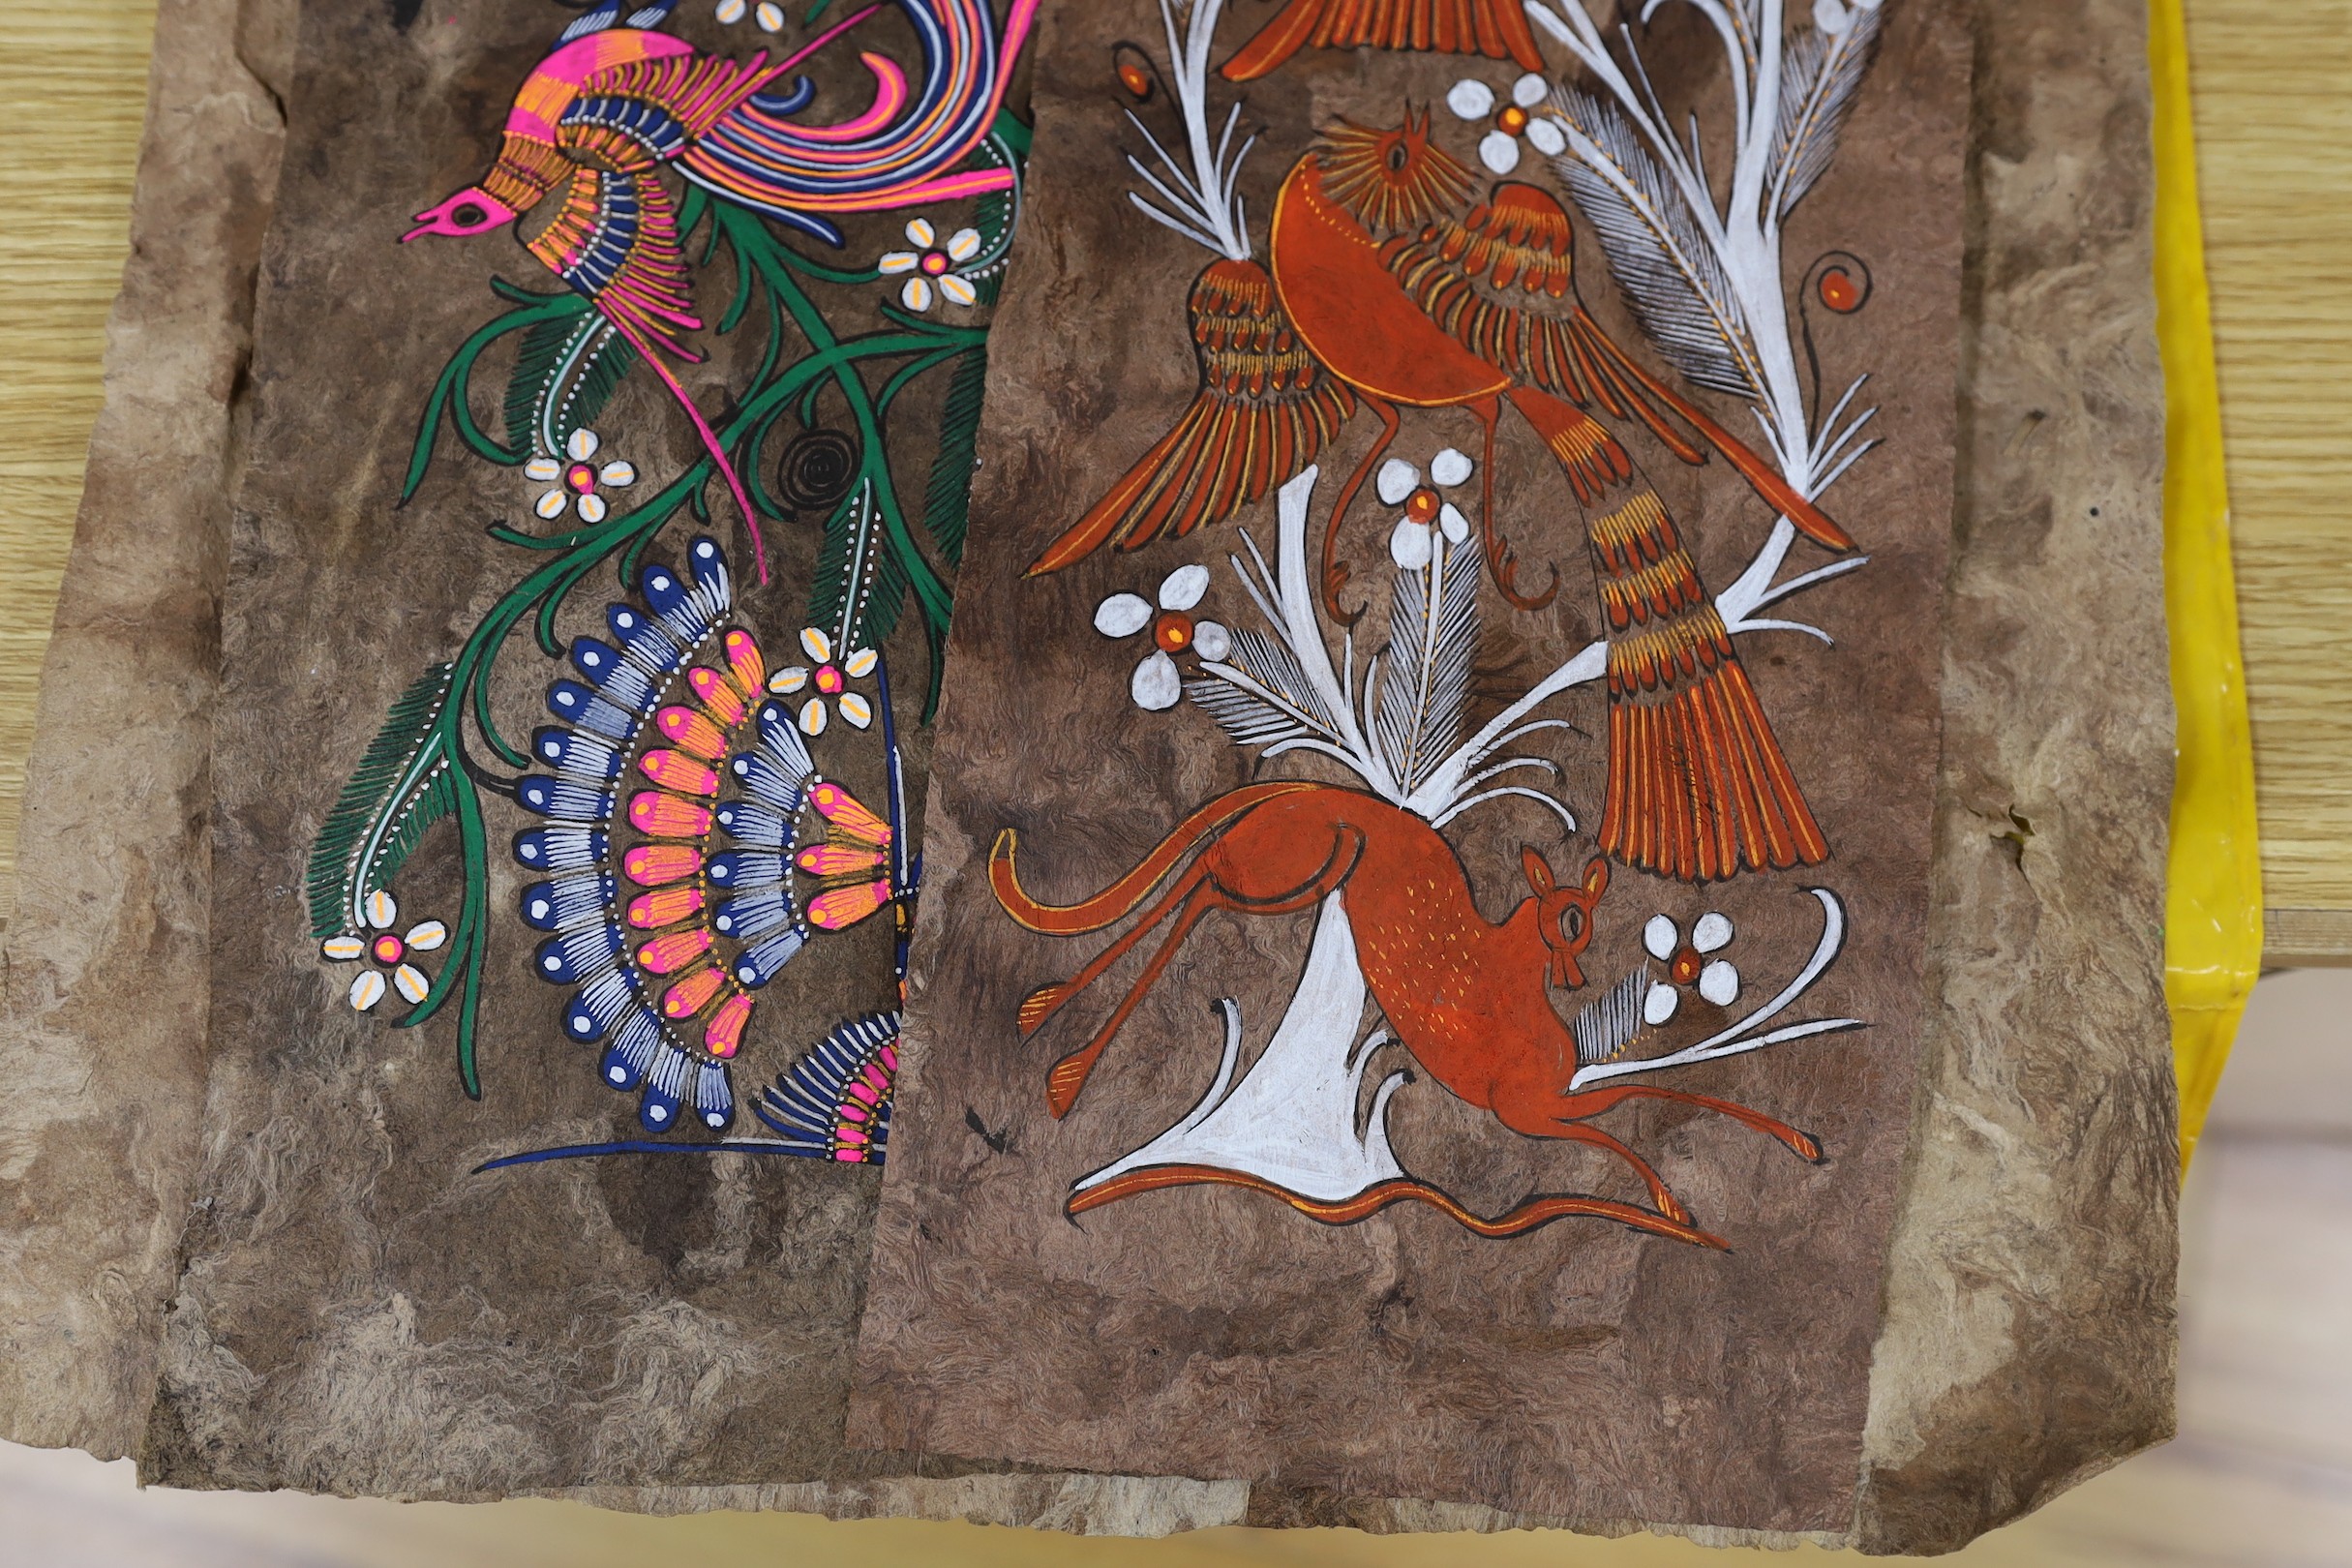 A selection of various Indonesian animal mural paintings